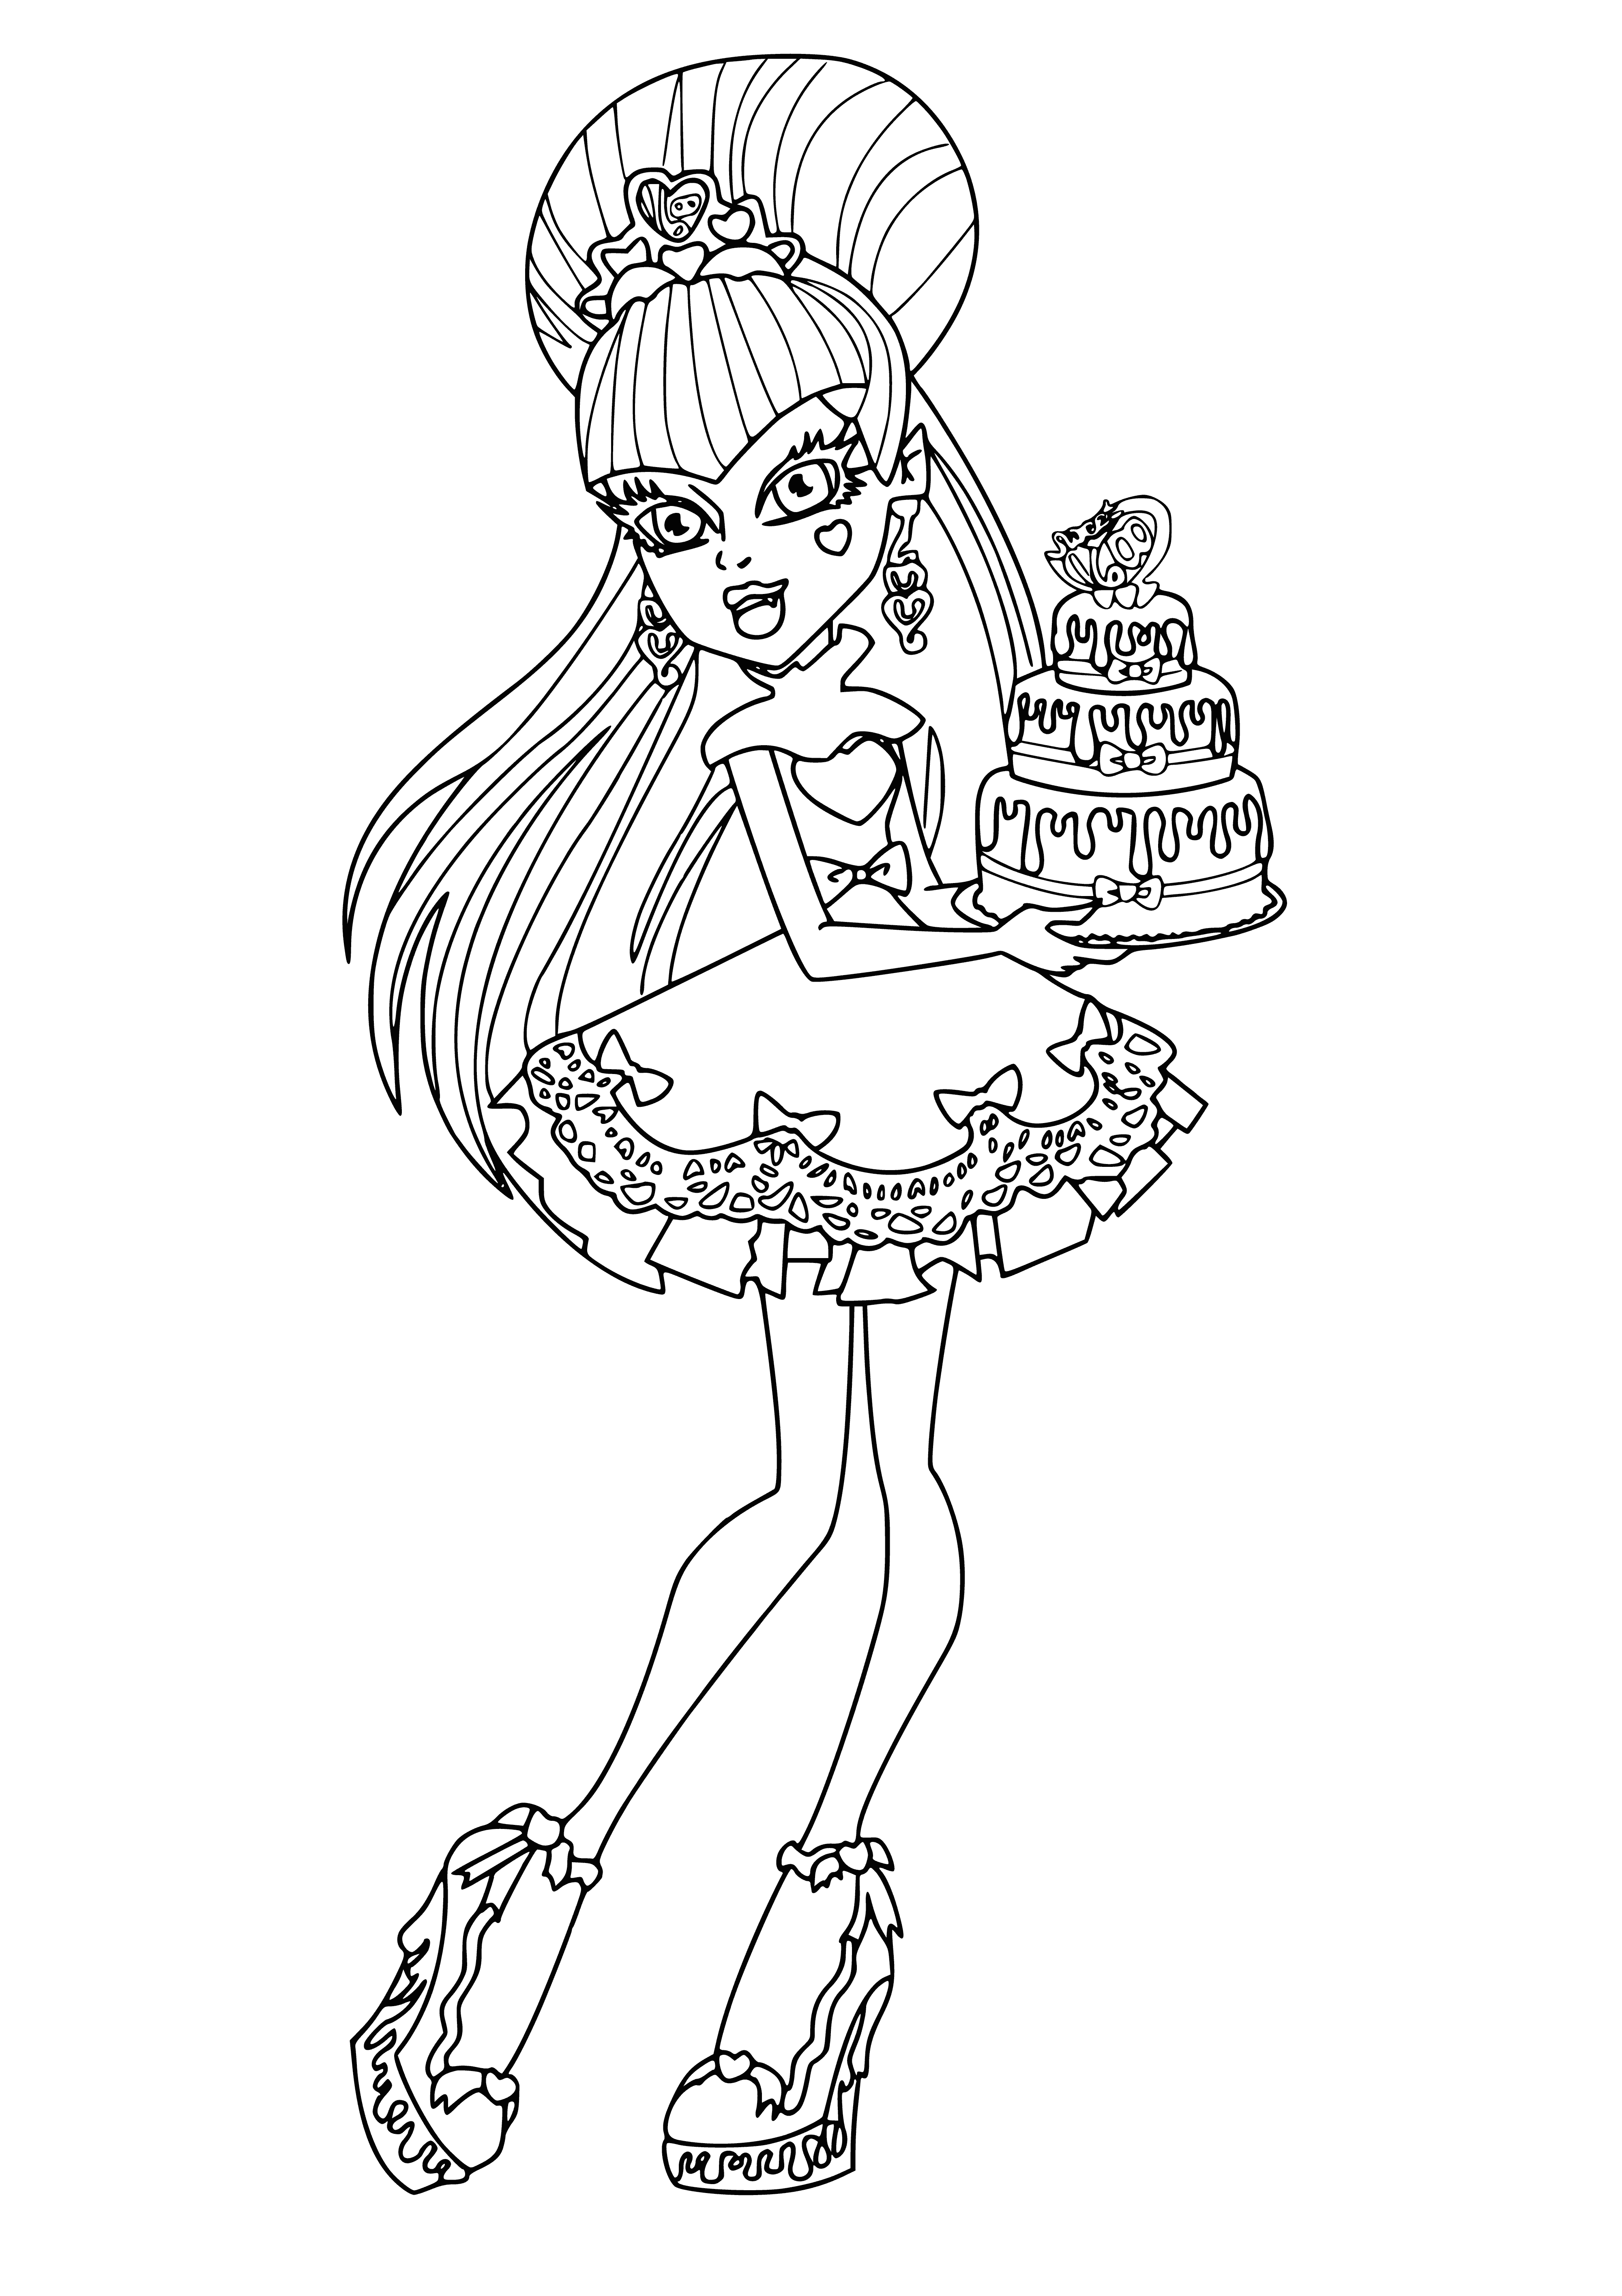 coloring page: Draculaura holds a two-tier cake decorated w/pink & white icing & a pink rose--a sweet treat for Monster High fans! #MonsterHigh